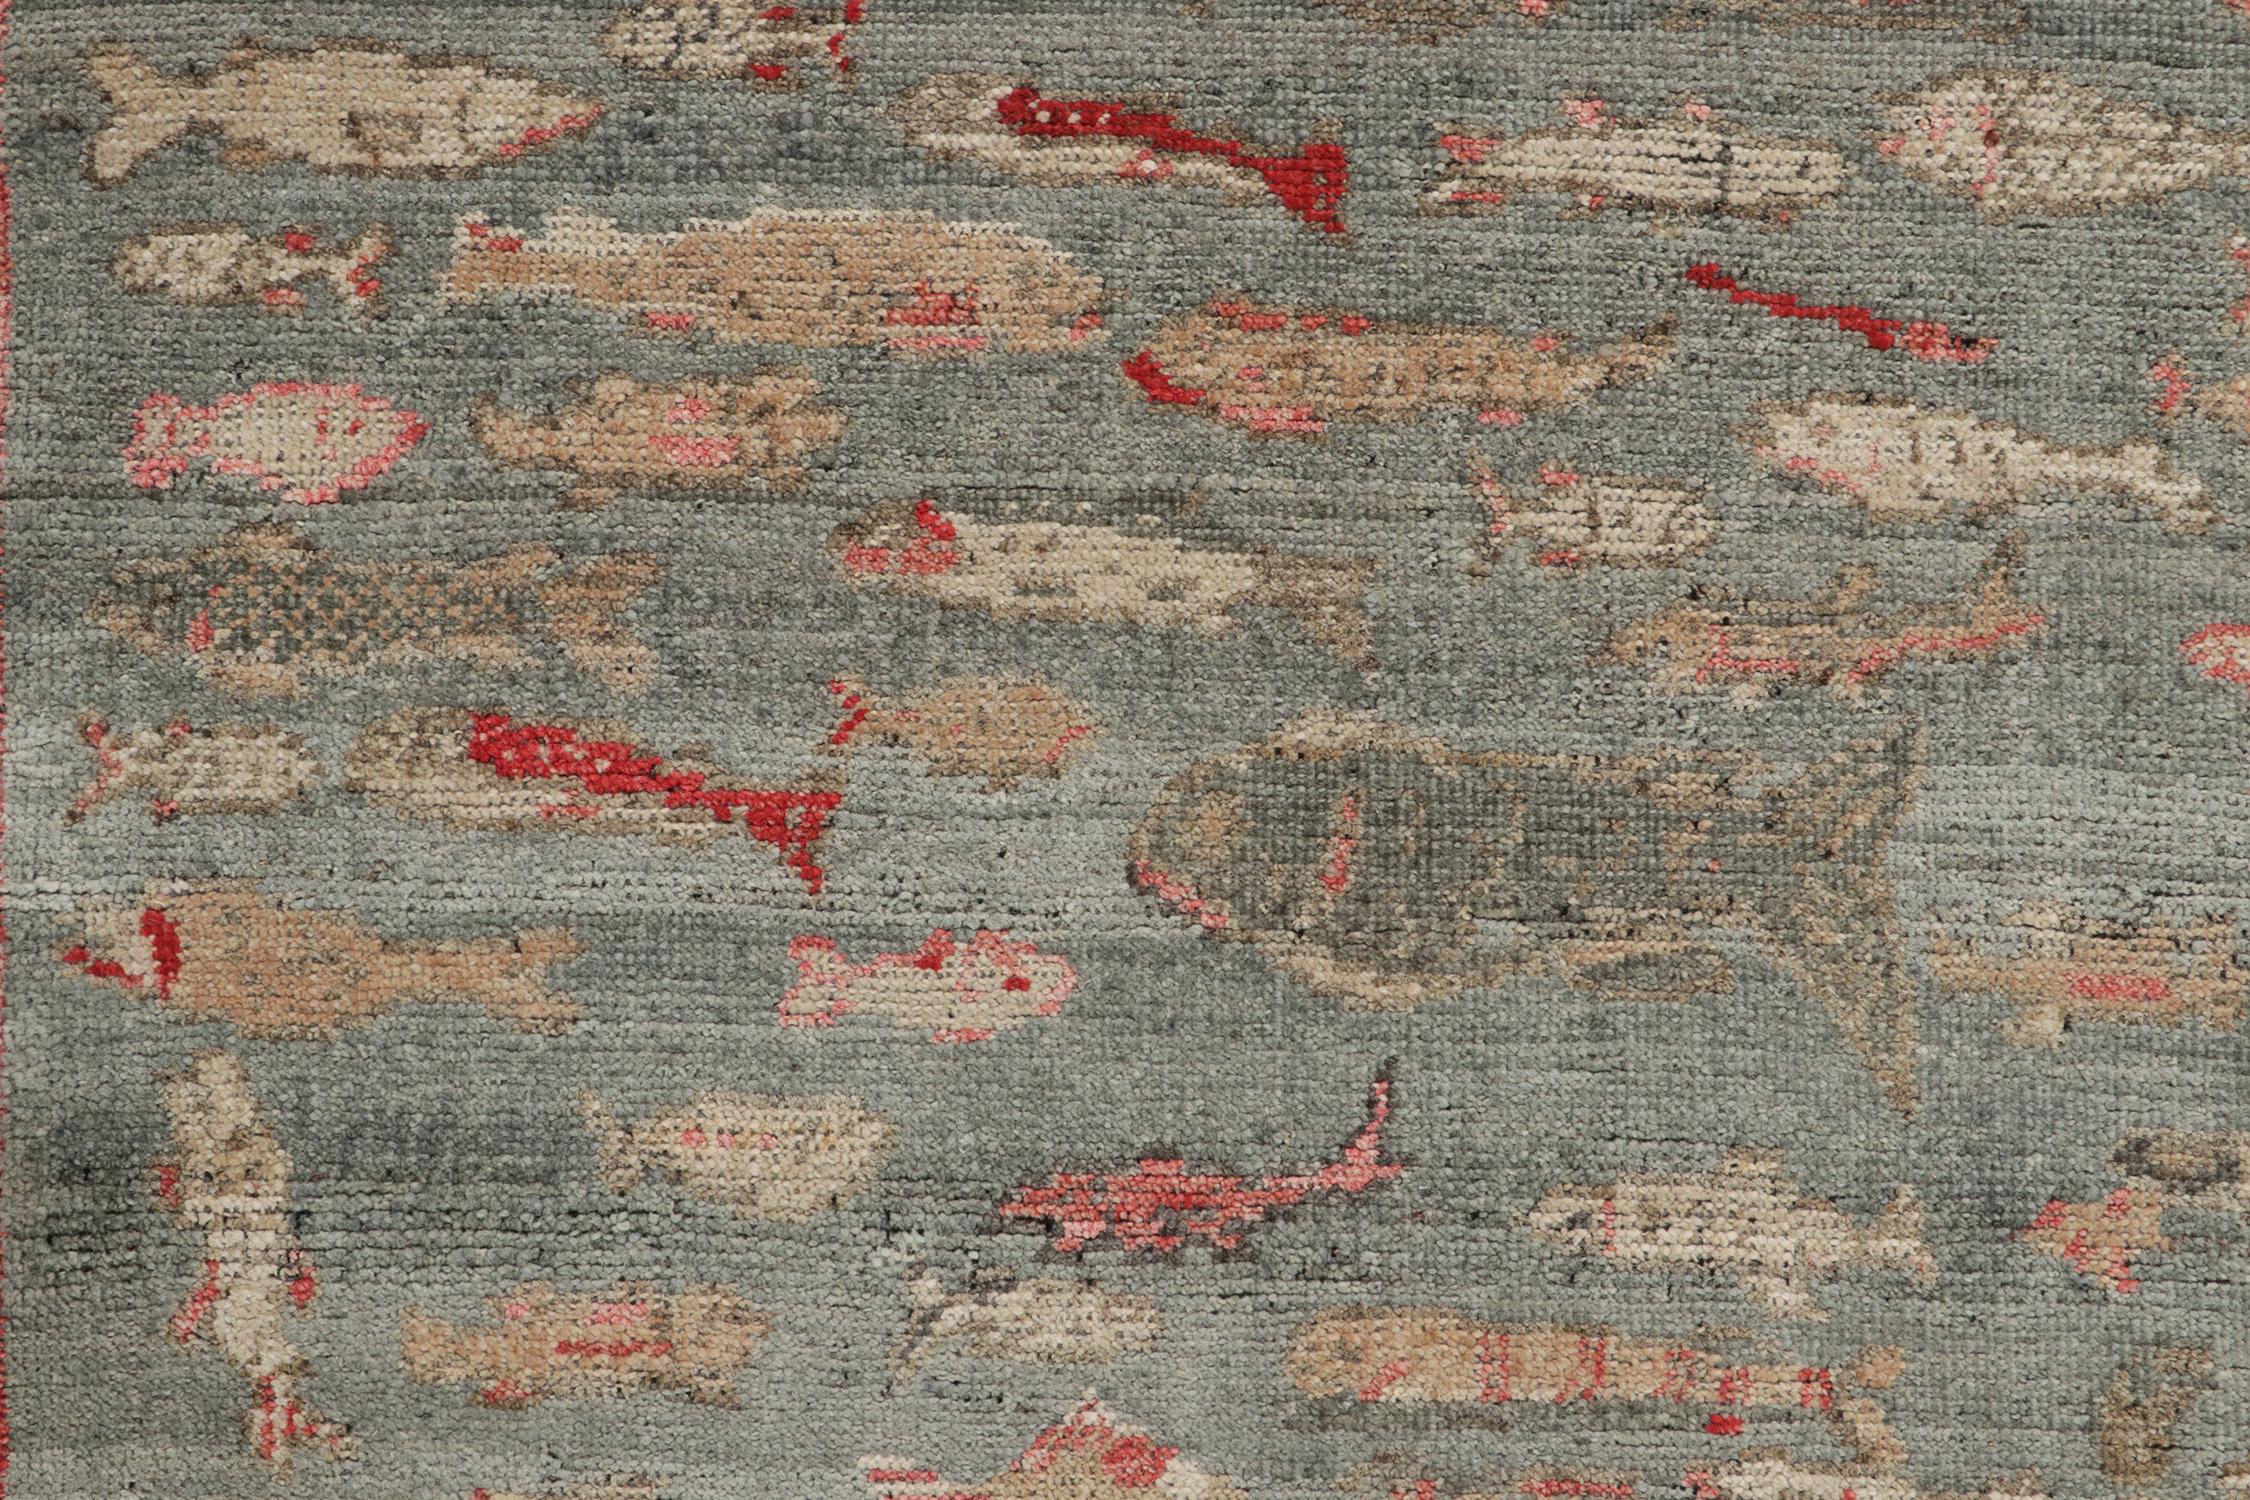 Rug & Kilim’s Pictorial Style runner in Blue, Beige and Red Fish Patterns In New Condition For Sale In Long Island City, NY